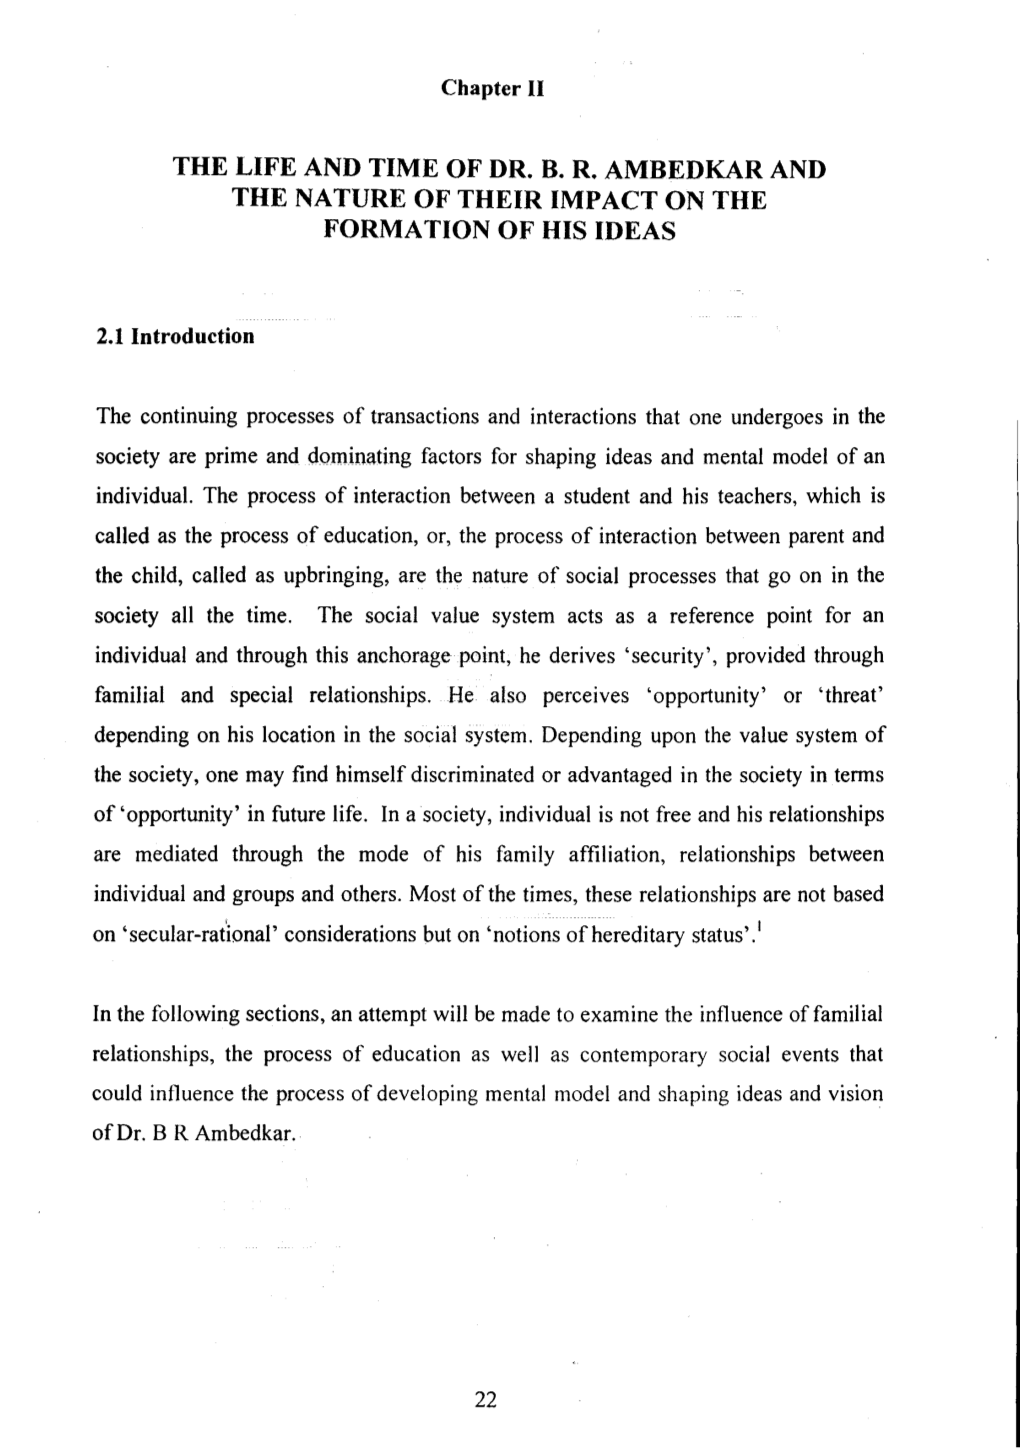 The Life and Time of Dr. B. R. Ambedkar and the Nature of Their Impact on the Formation of His Ideas